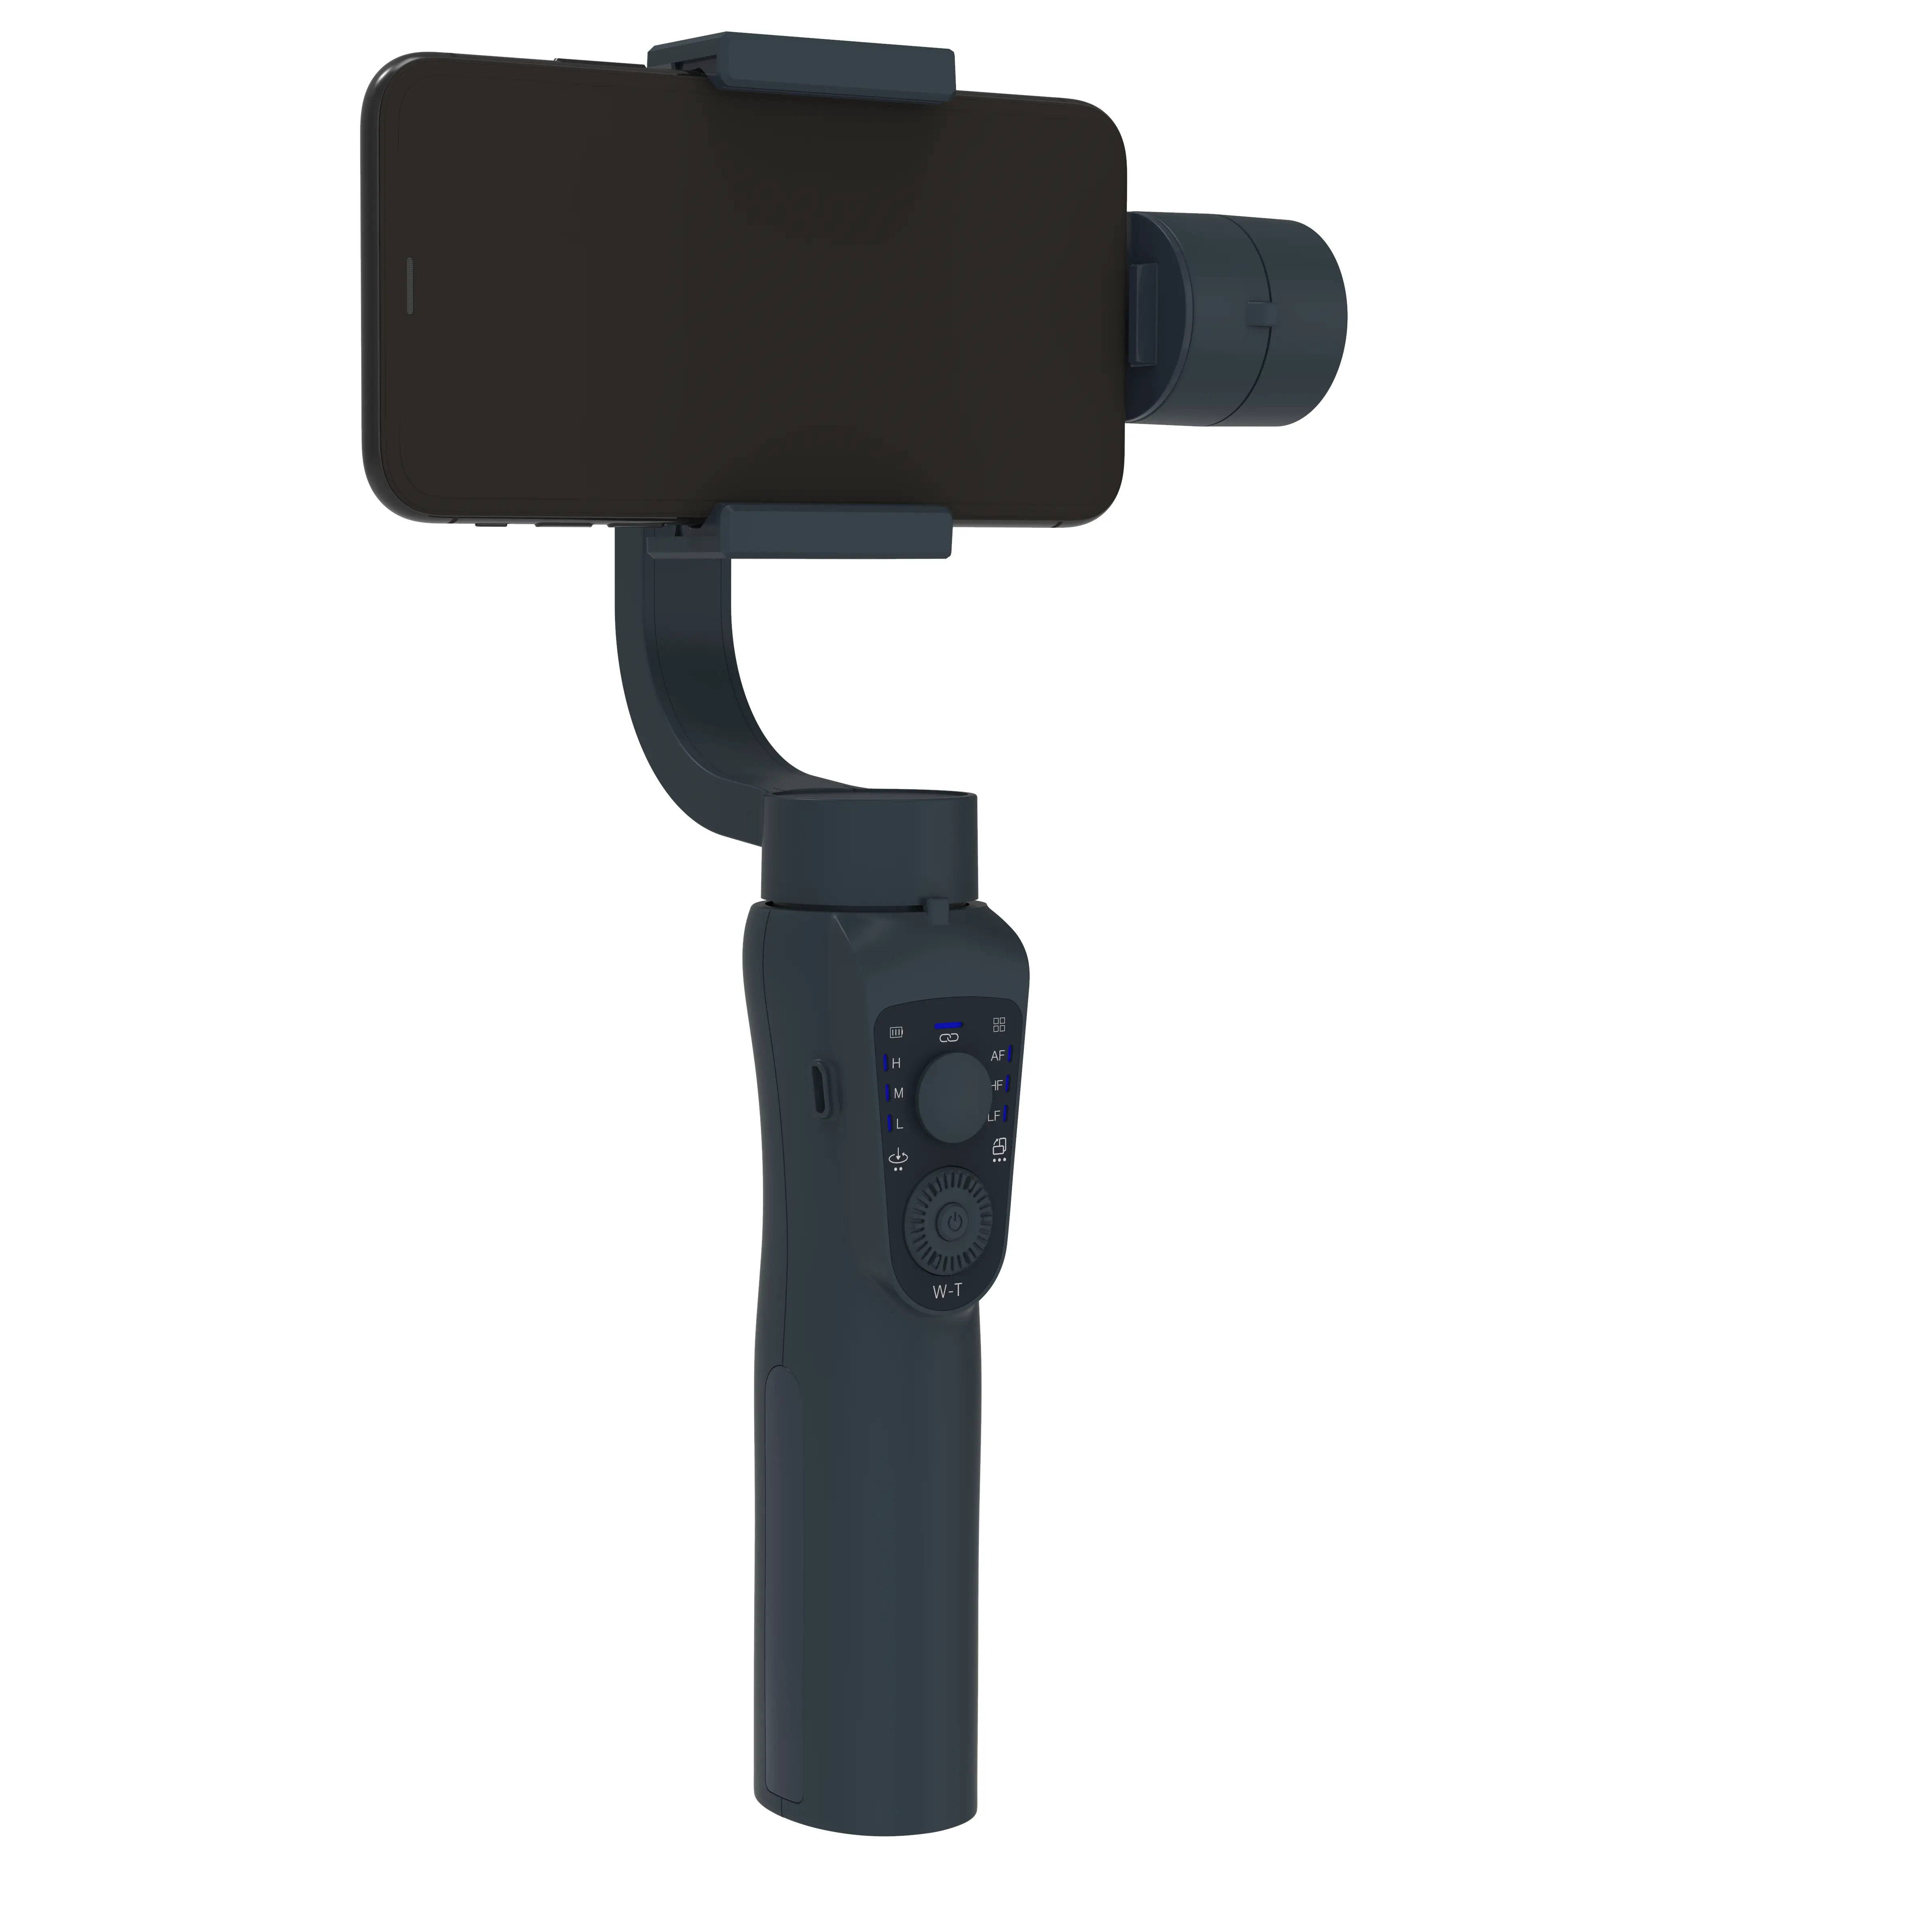 3-axis S5B phone gimbal stabilizer for mobile support action camera